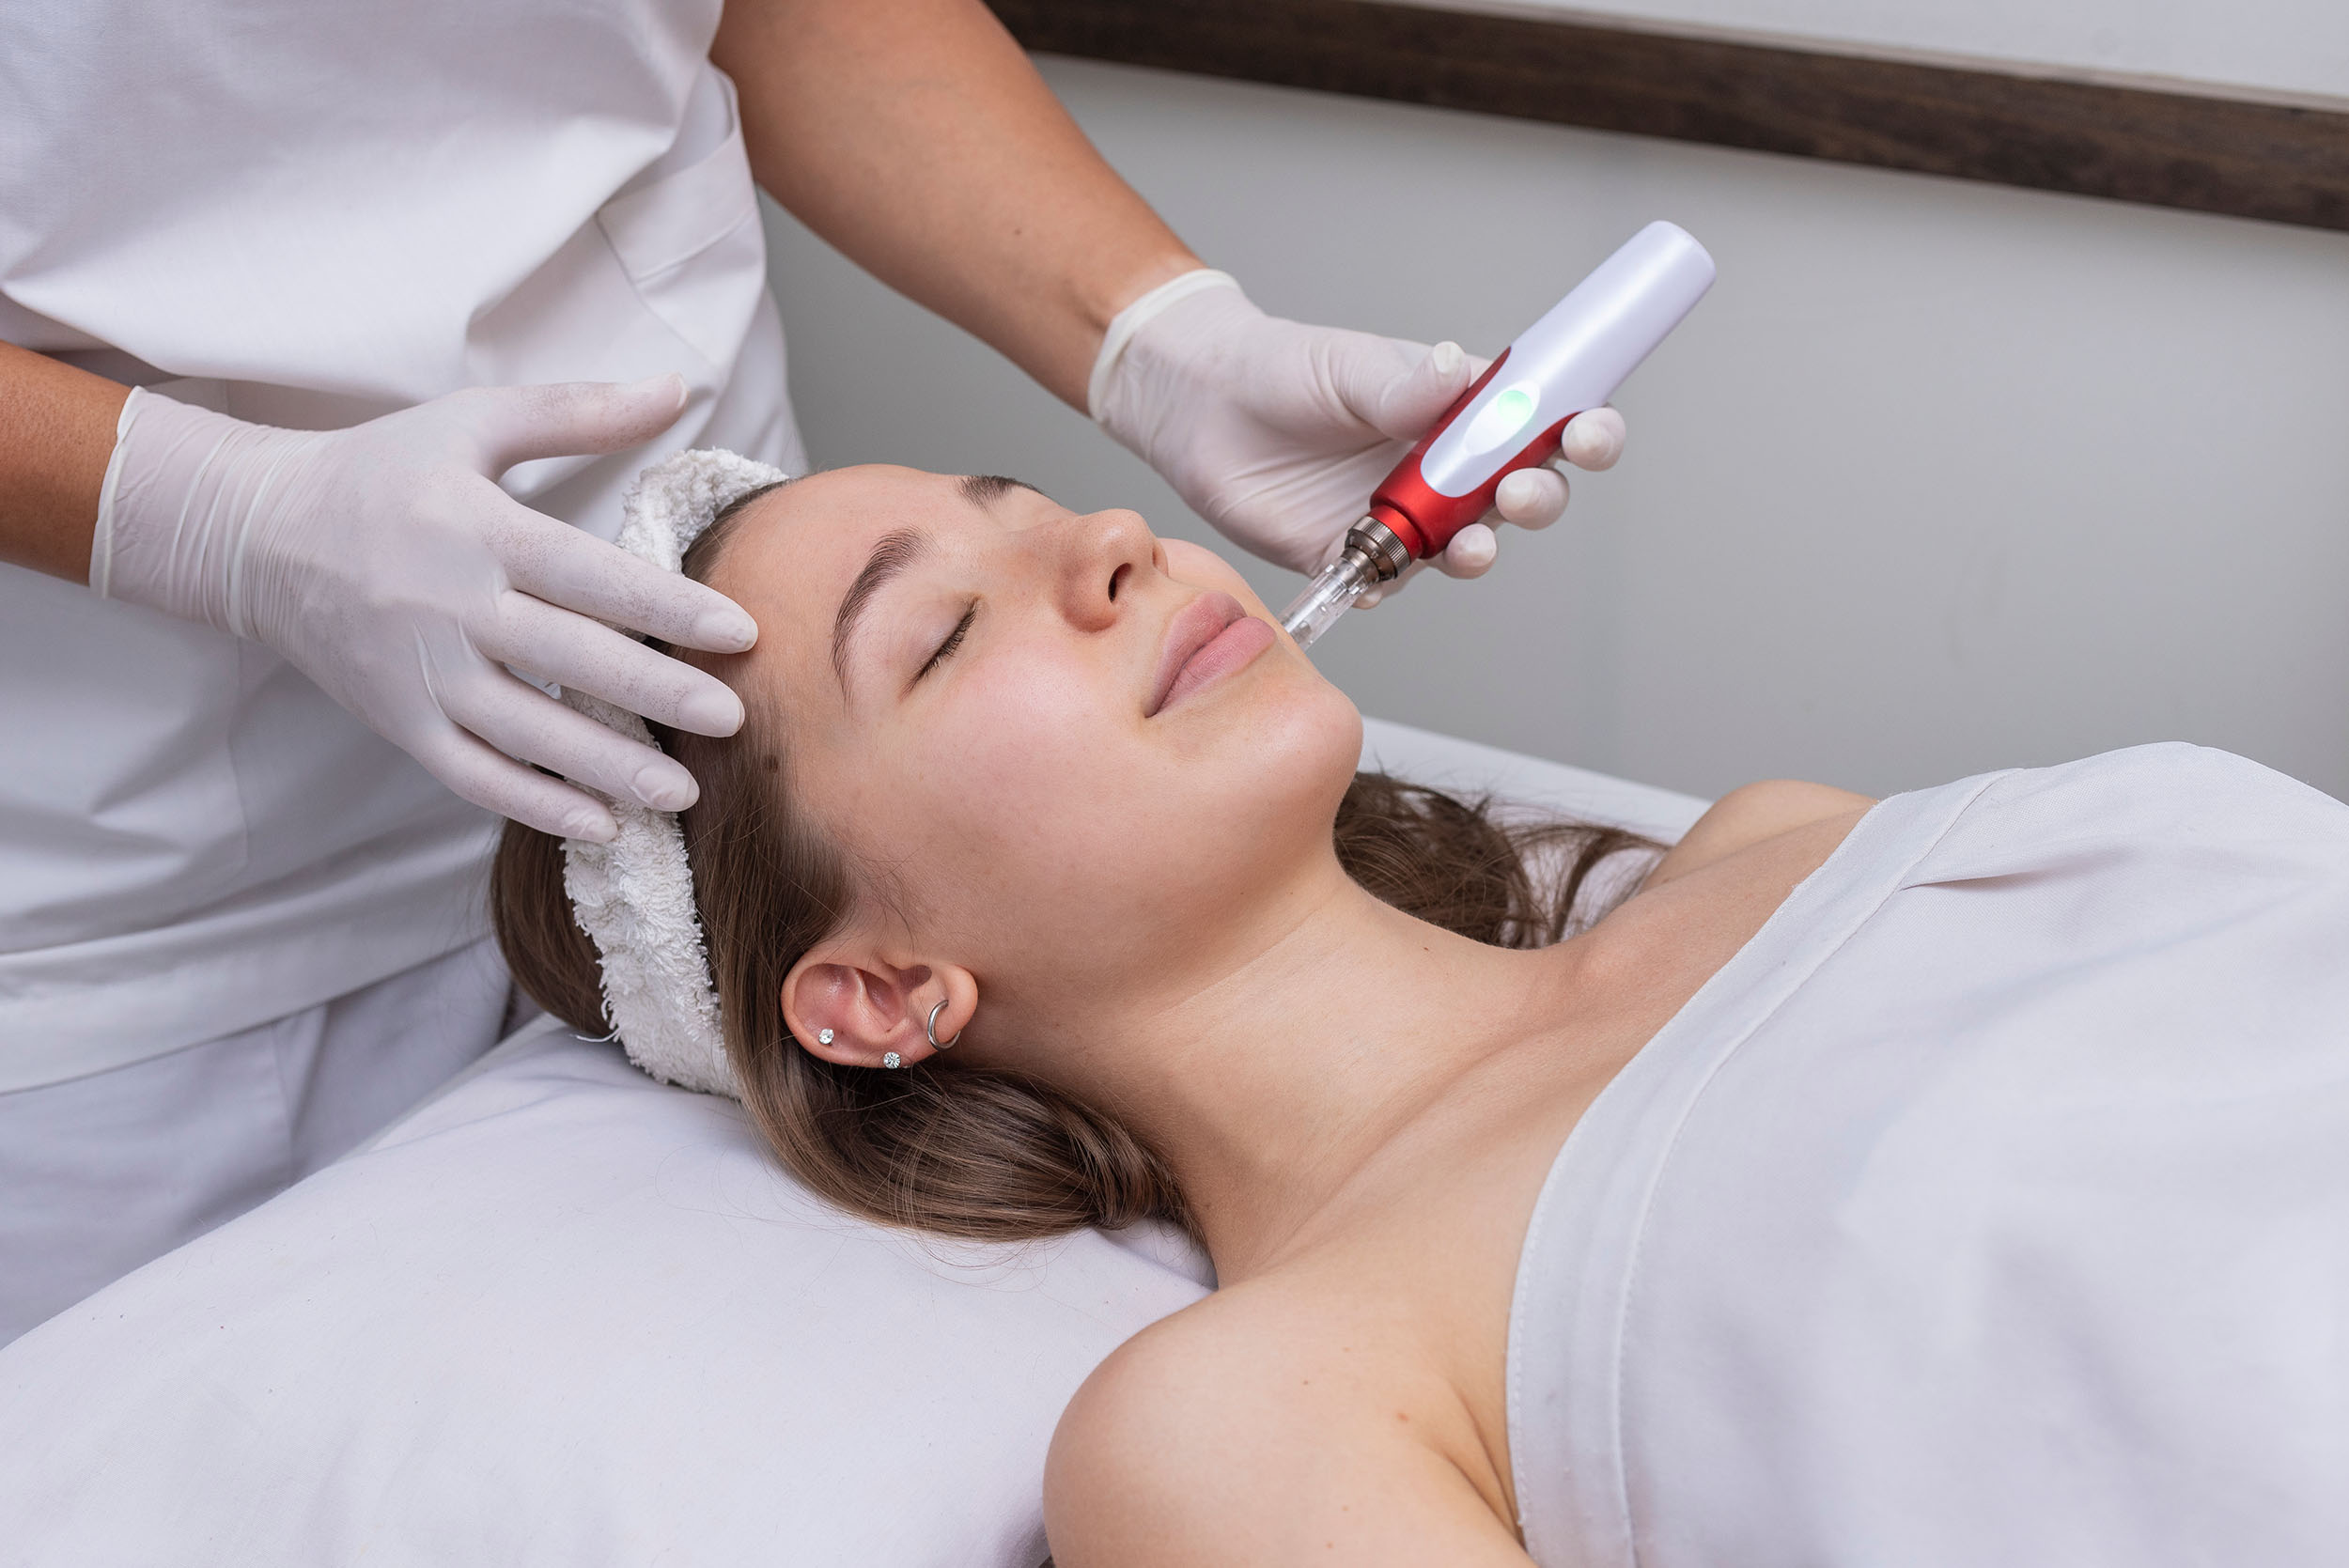 Defining Beauty Wellness & Med Spa in Tampa offers Morpheus8 skin tightening